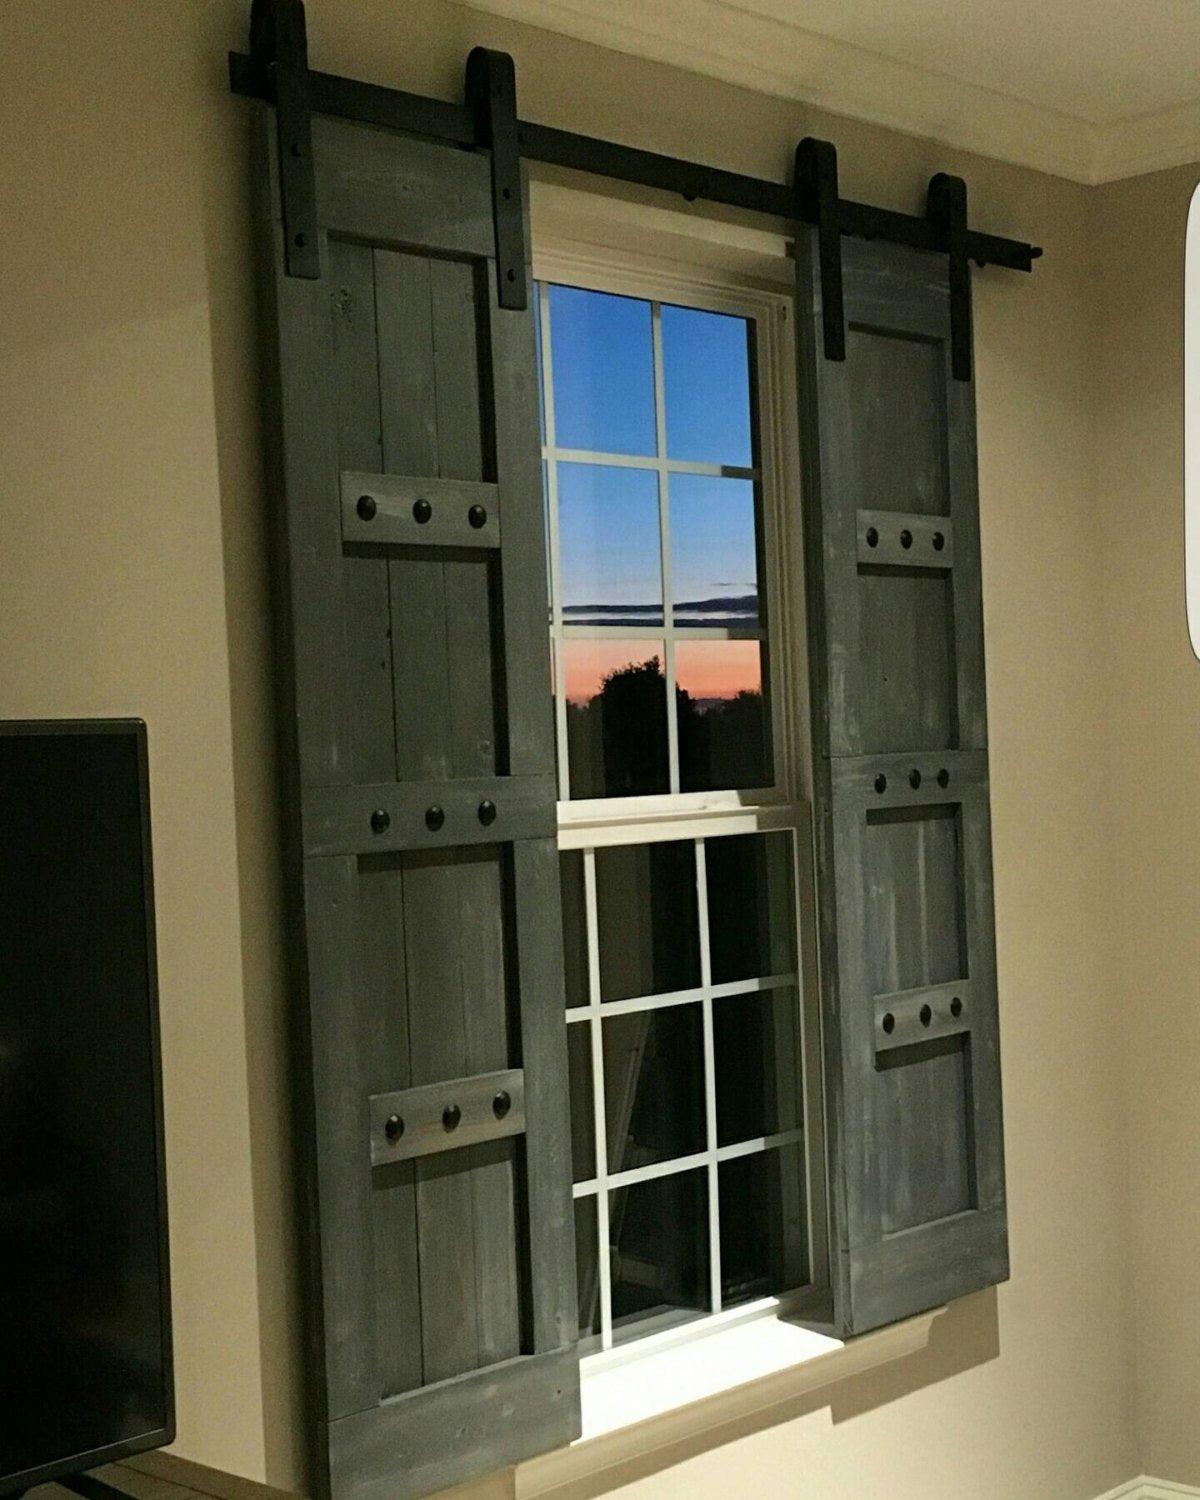 Television room window with a single wooden barn shutter